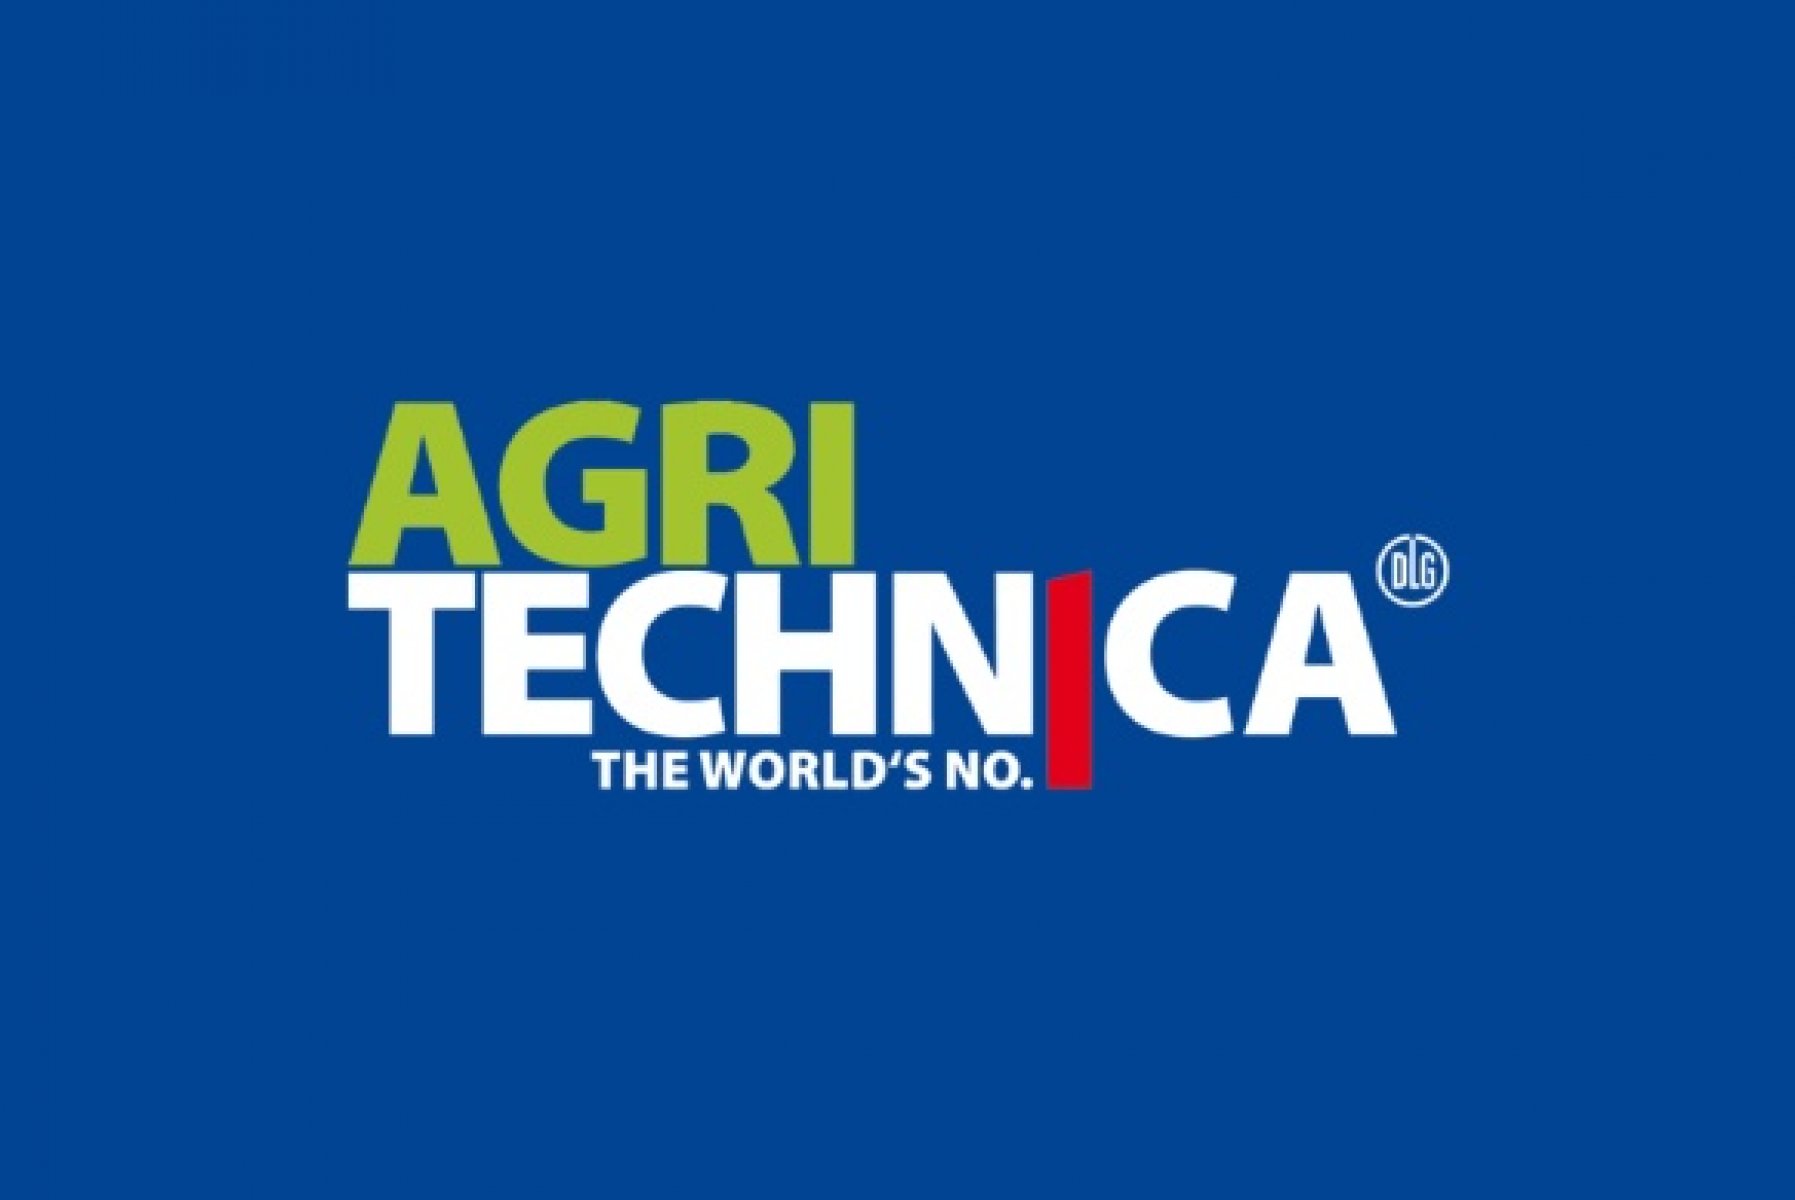 10.-16.11.2019 AGRITECHNICA Hannover, Niemcy